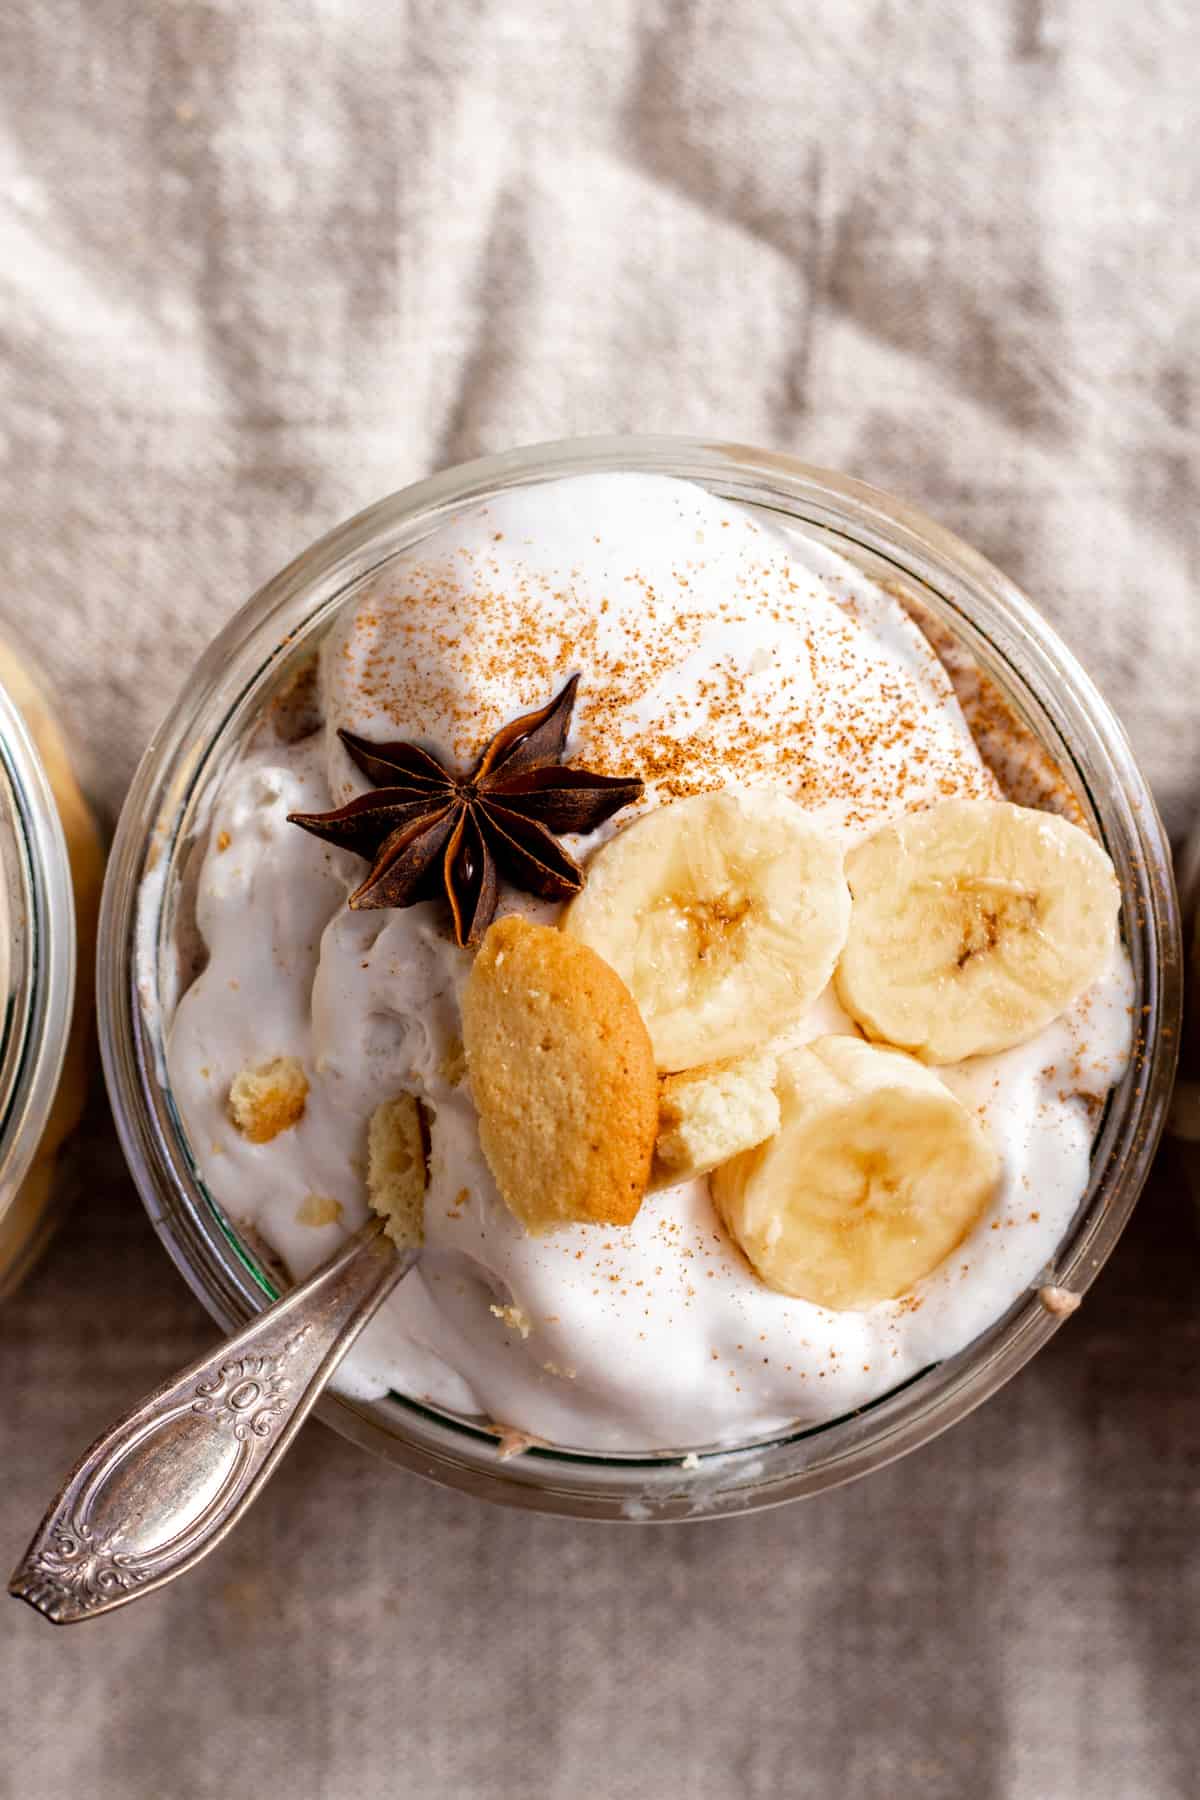 Sliced banana and star anise on top of pudding with spoon in jar.